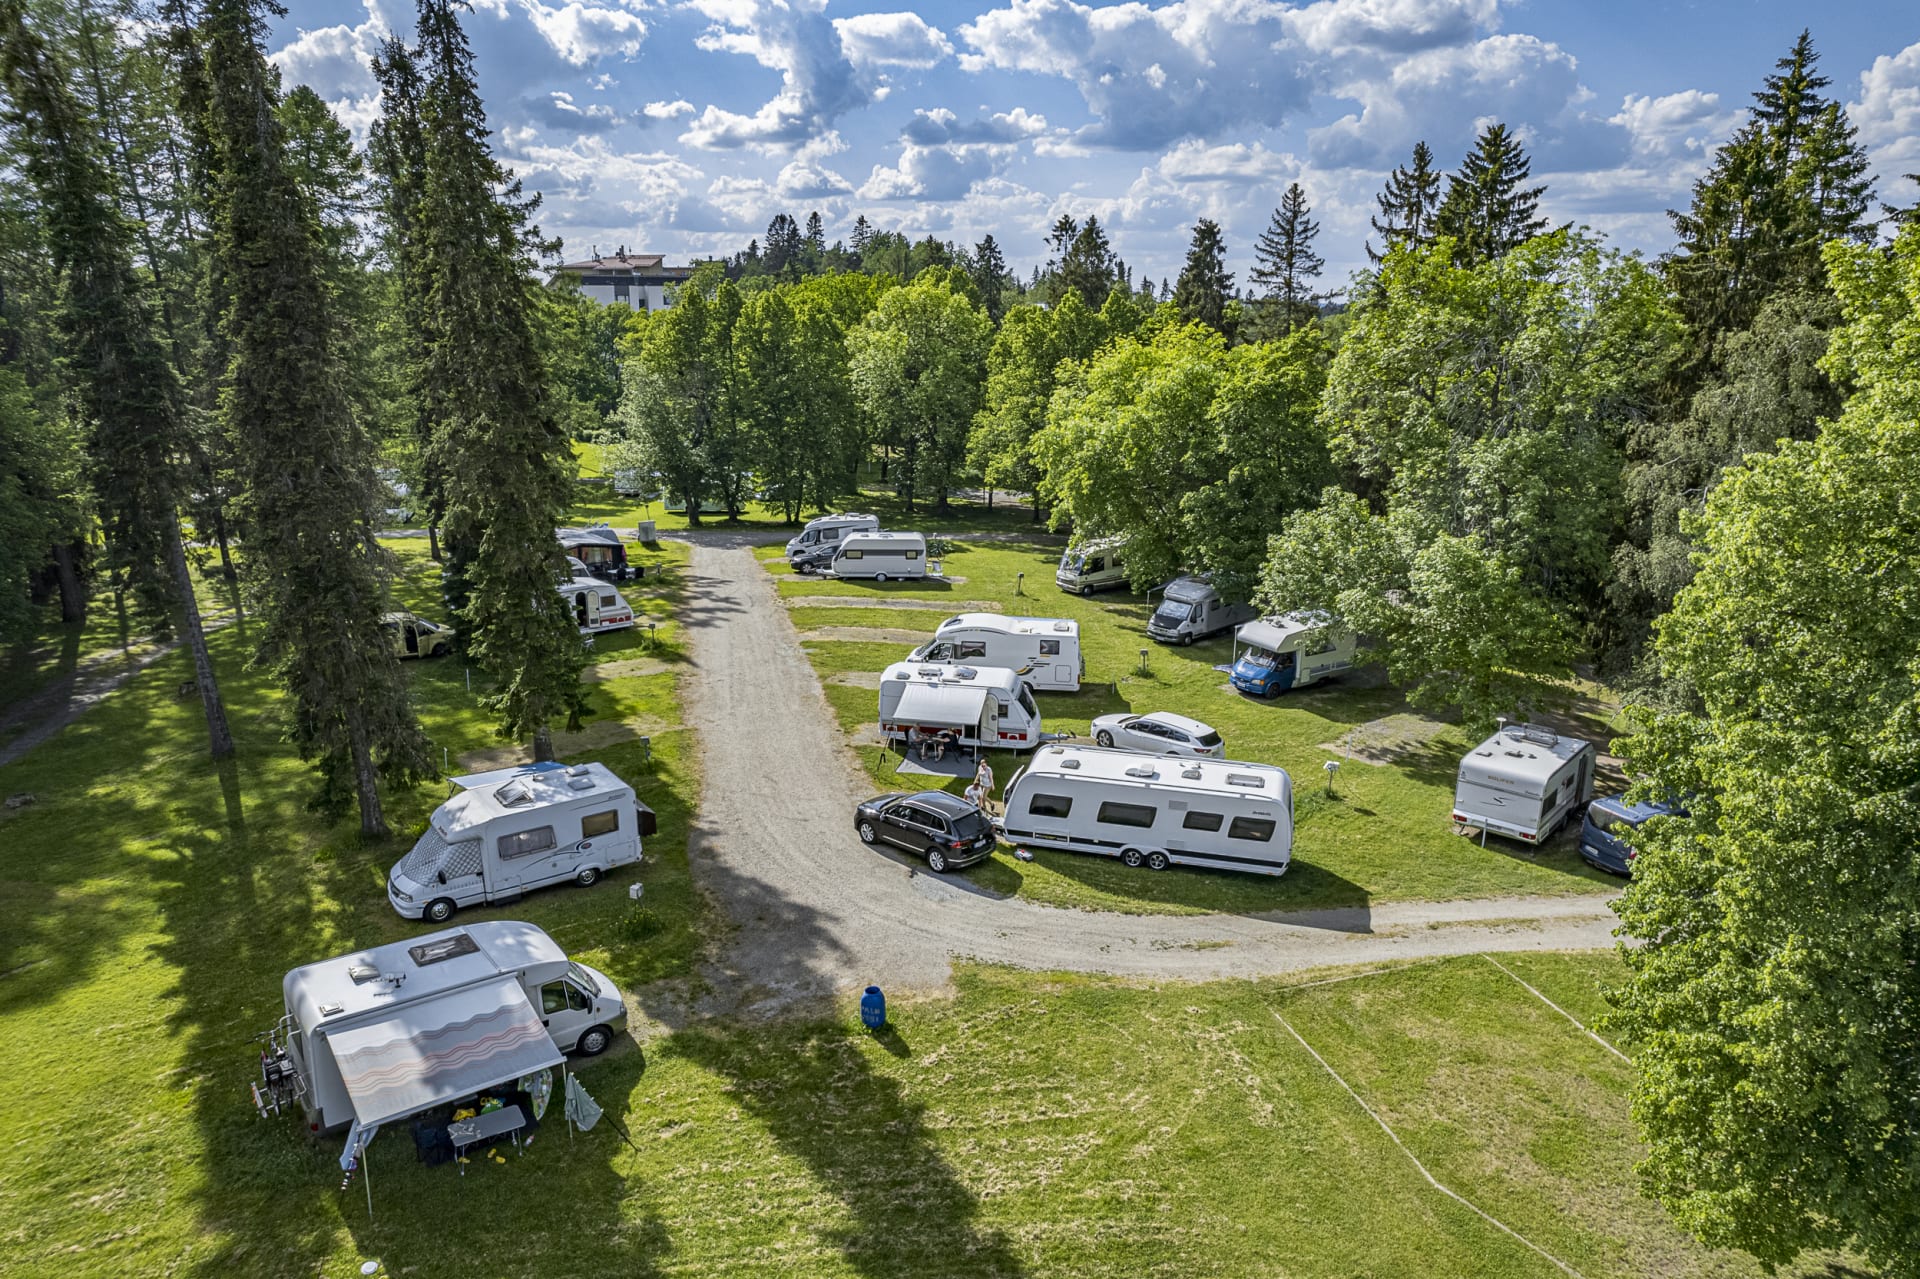 Härmälä Camping has 90 pitches with electricity for caravanners